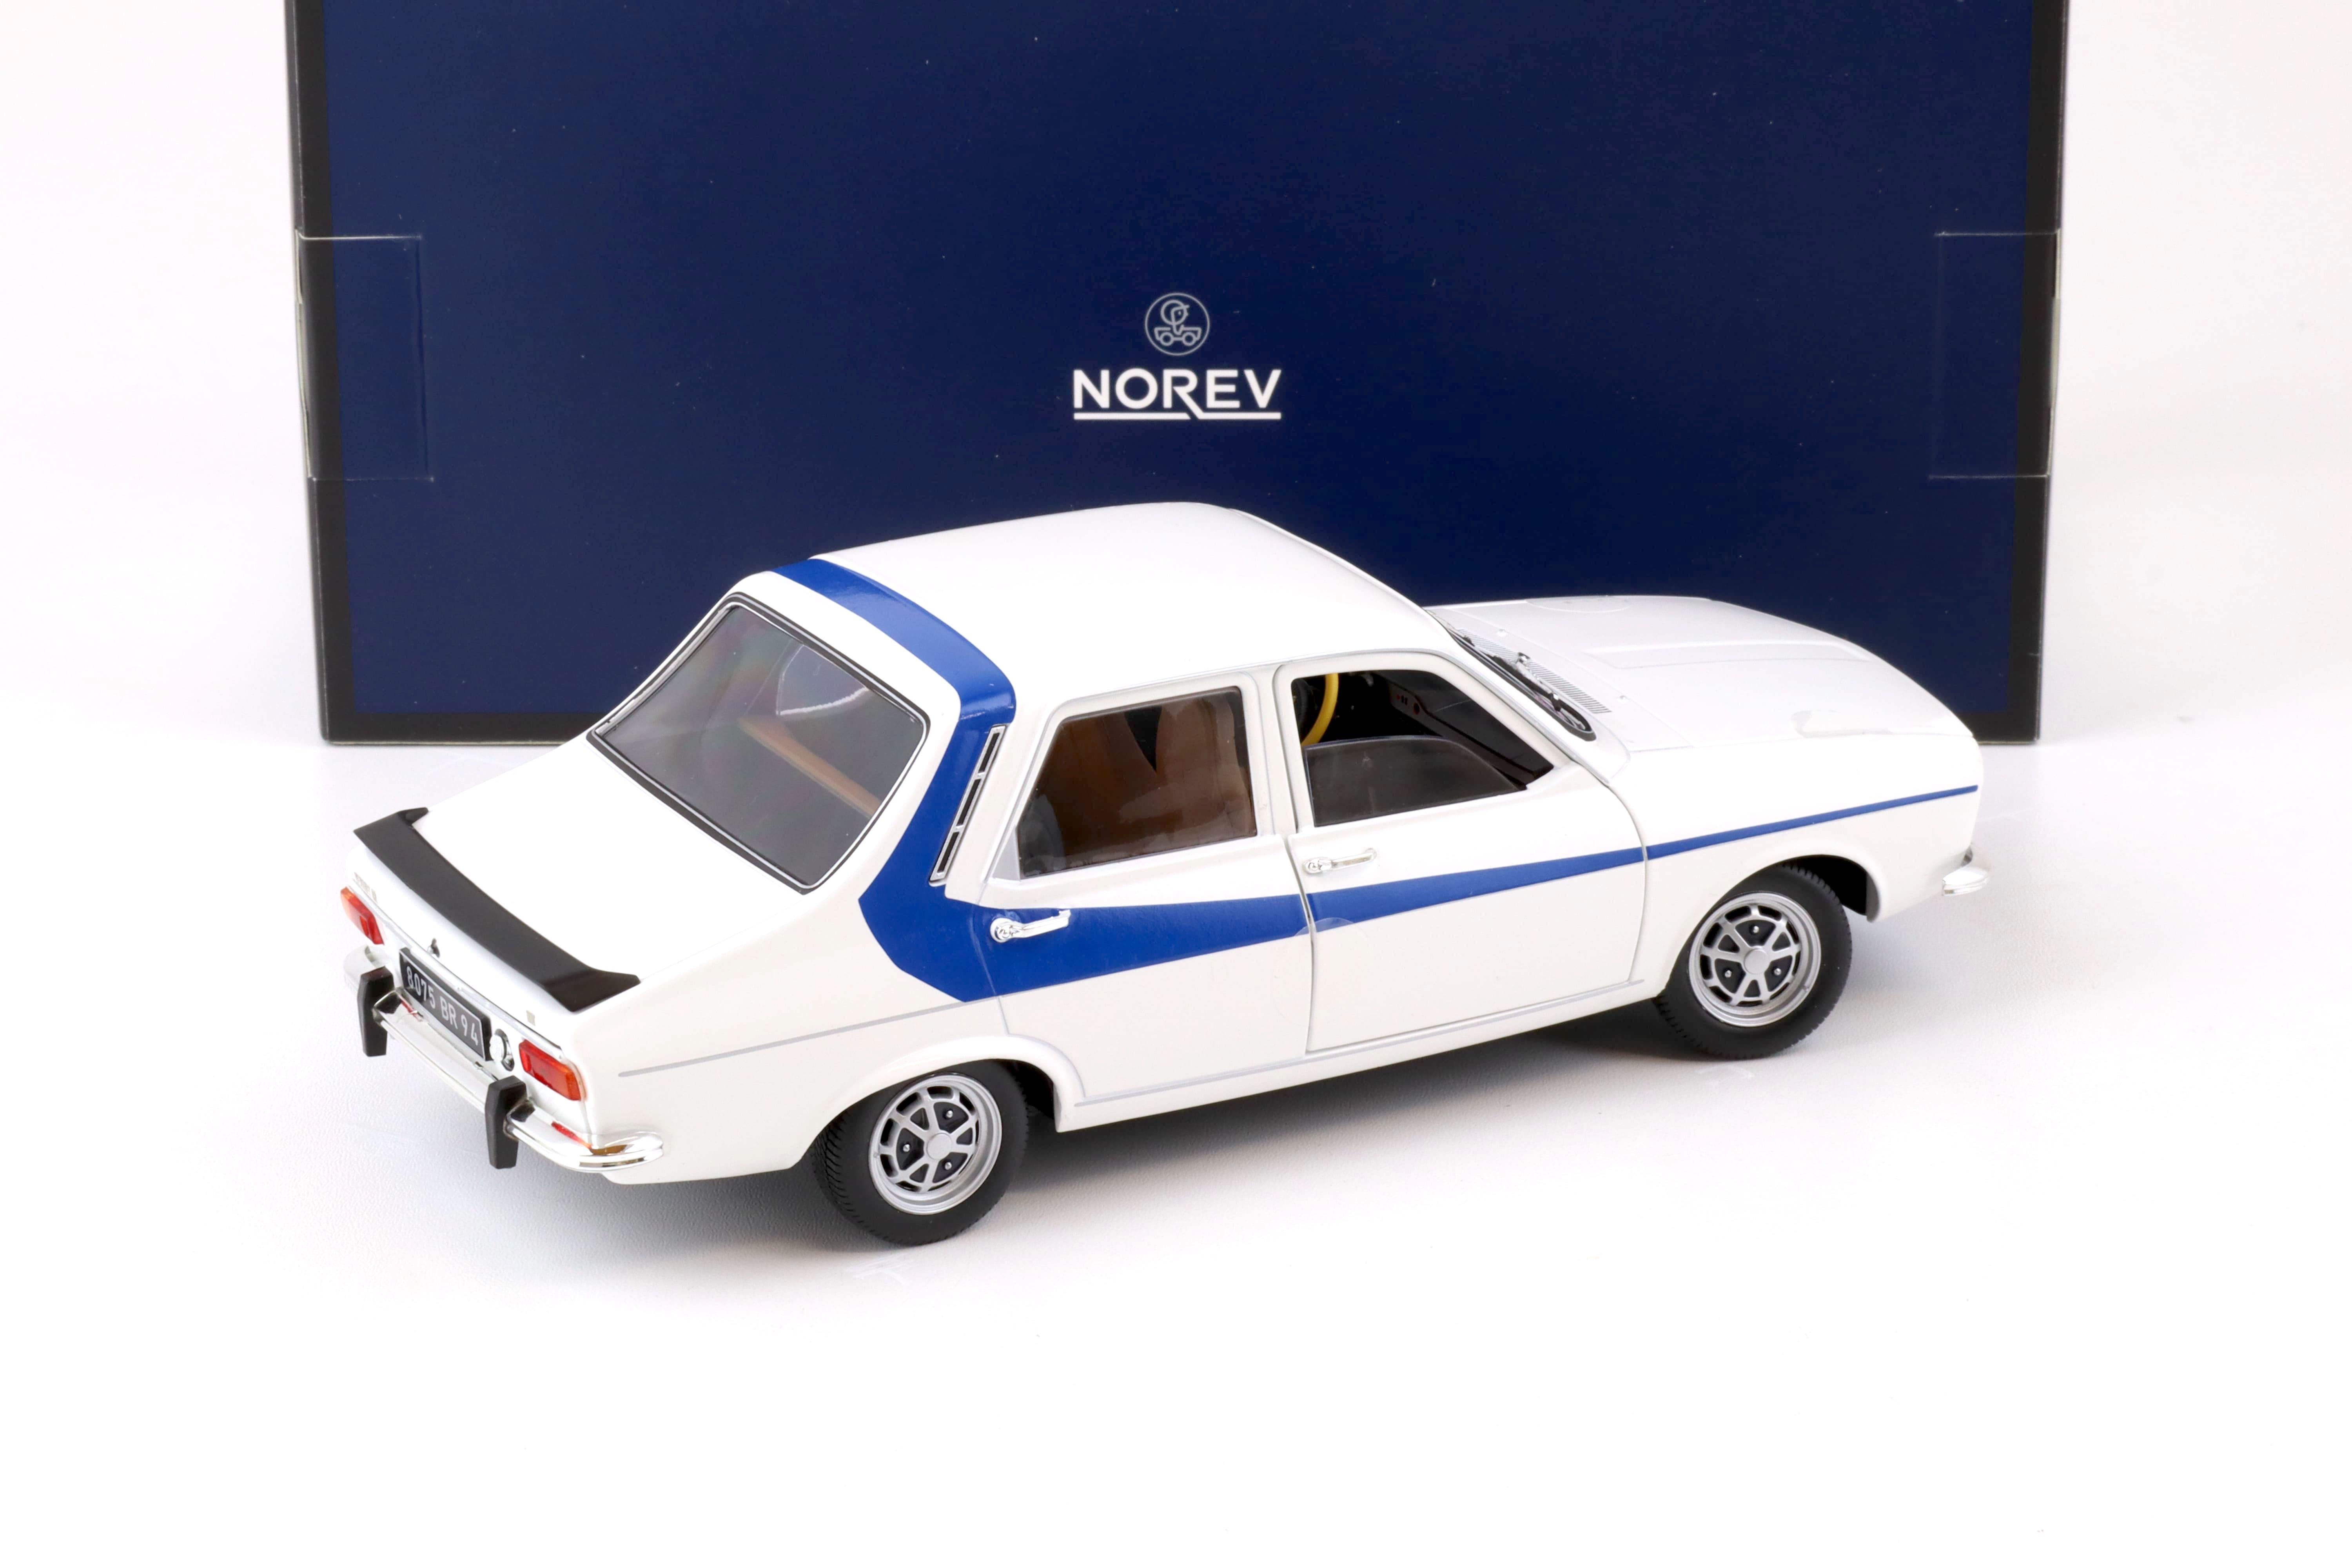 1:18 Norev Renault 12 white with blue side deco 1984 - Limited 300 pcs.